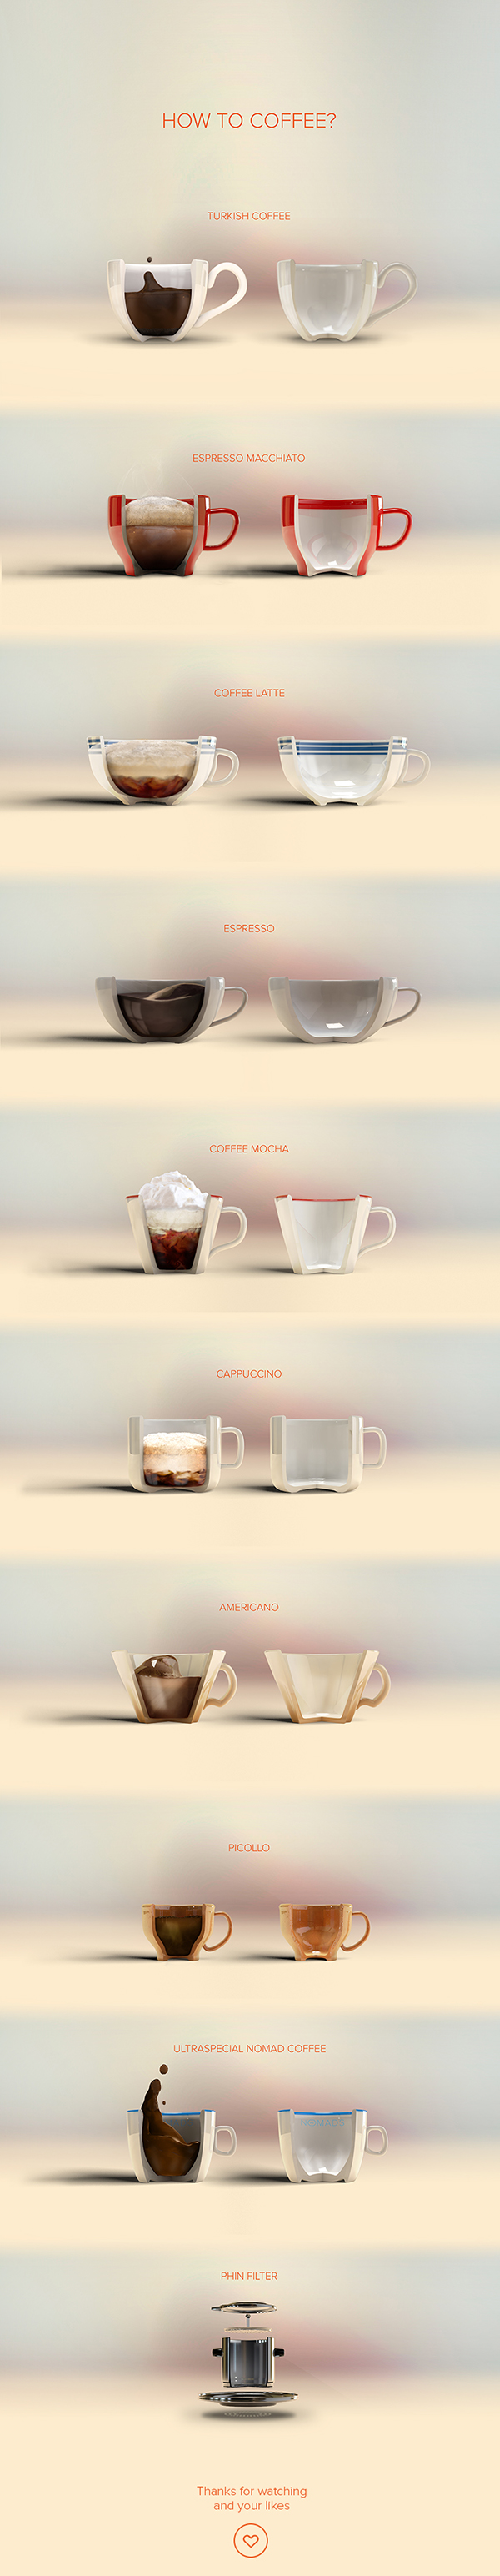 How to Coffee